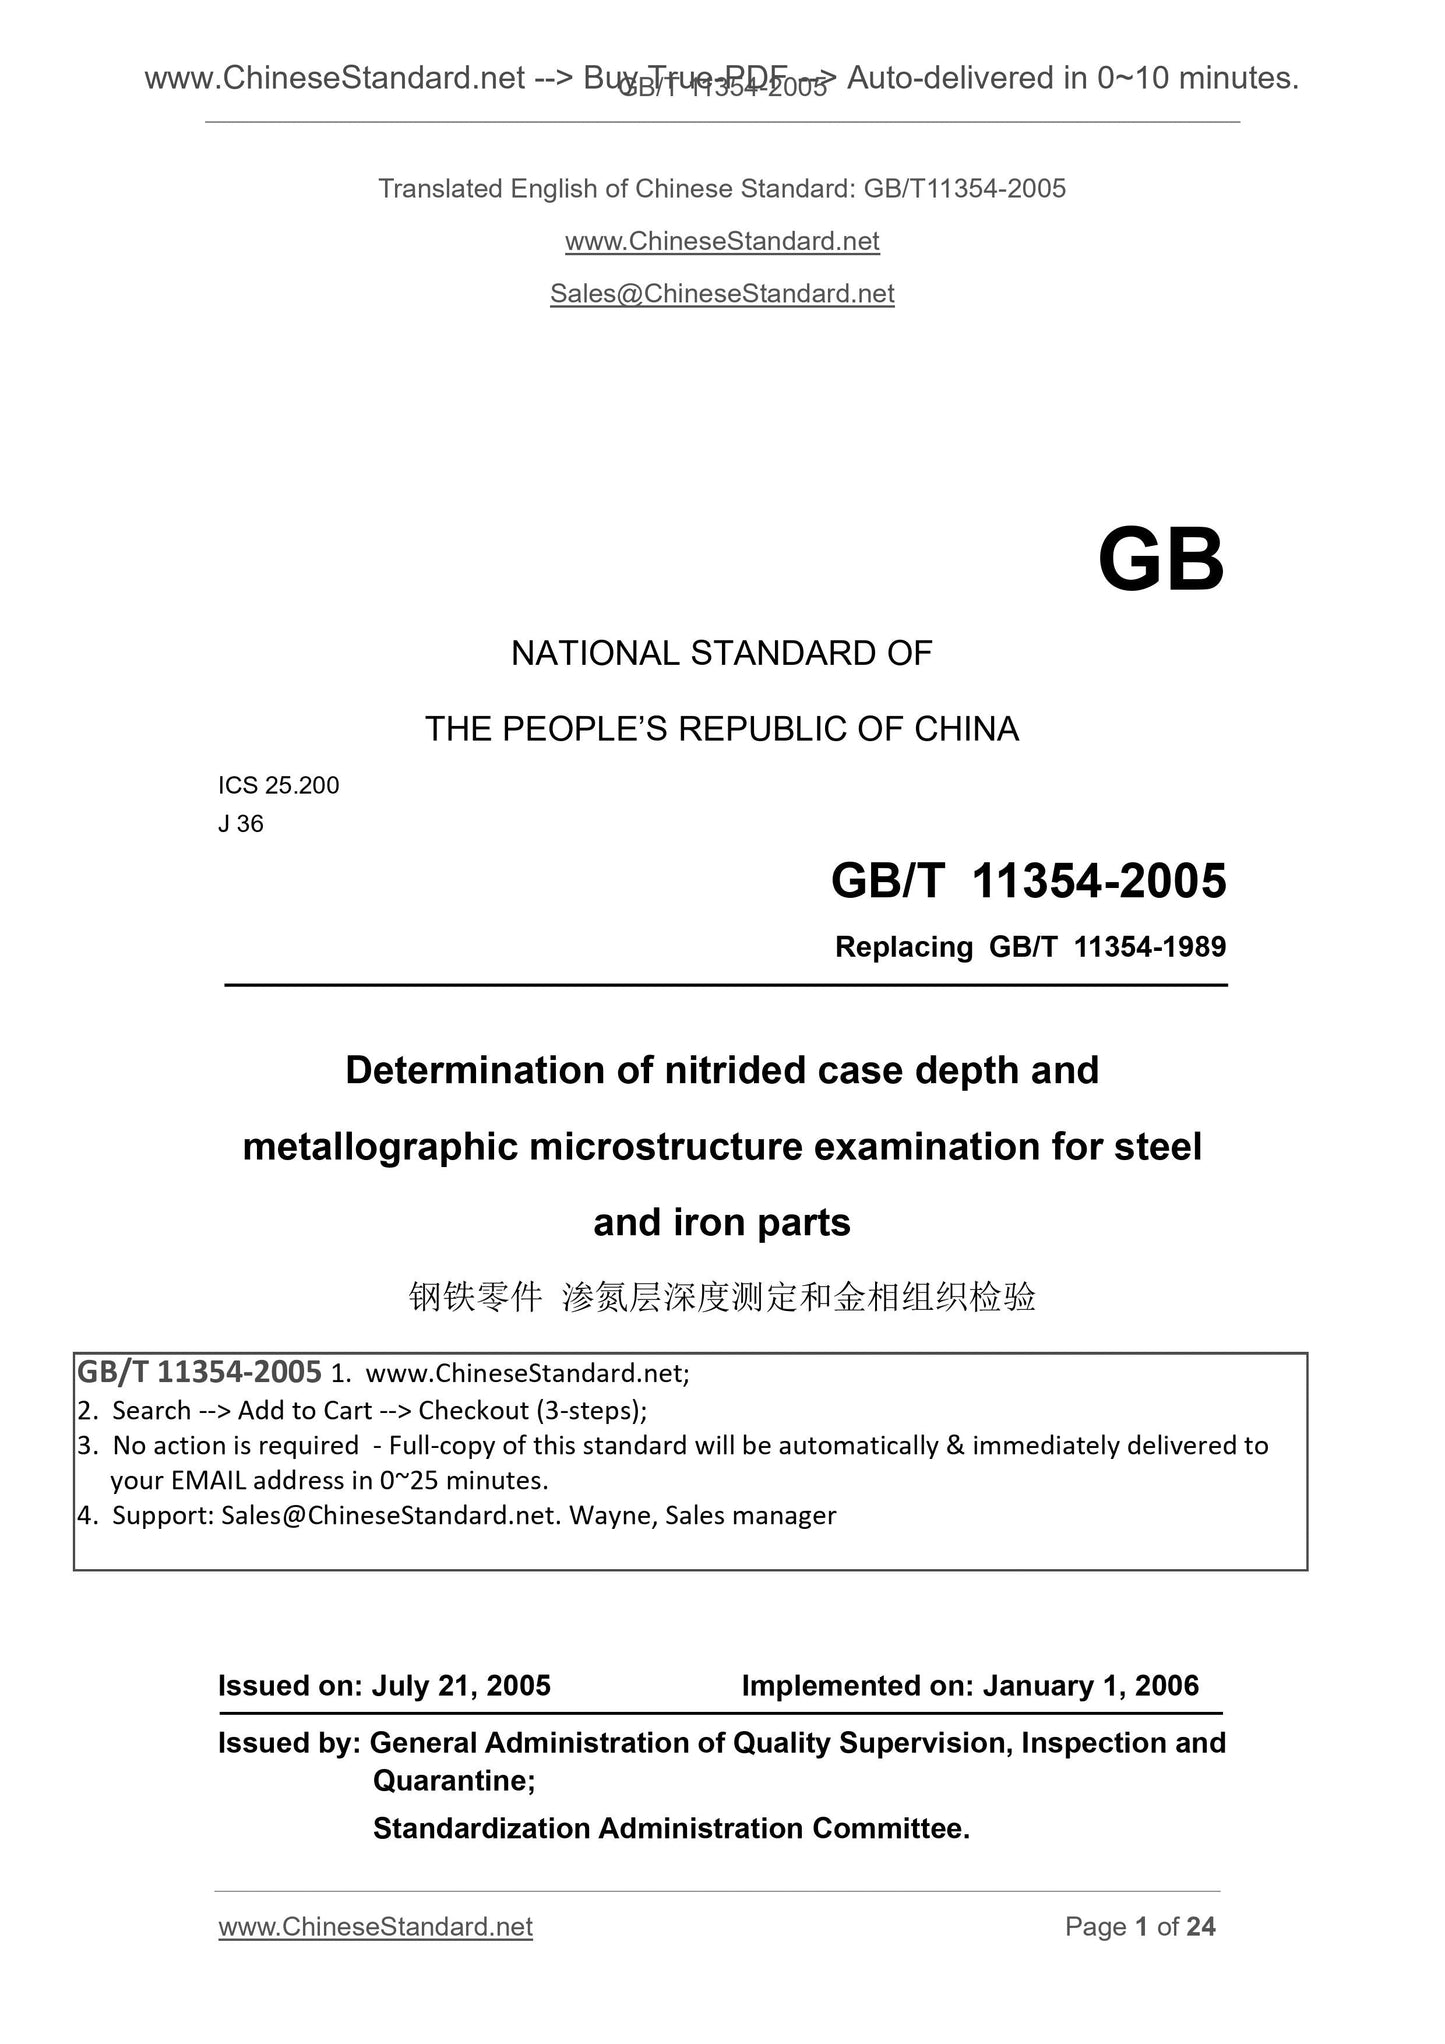 GB/T 11354-2005 Page 1